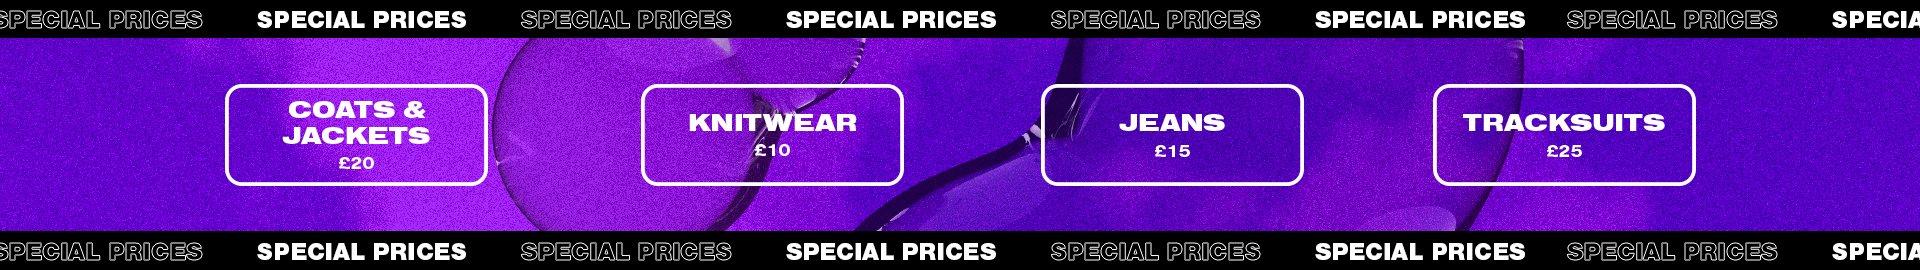 Mens Special Prices